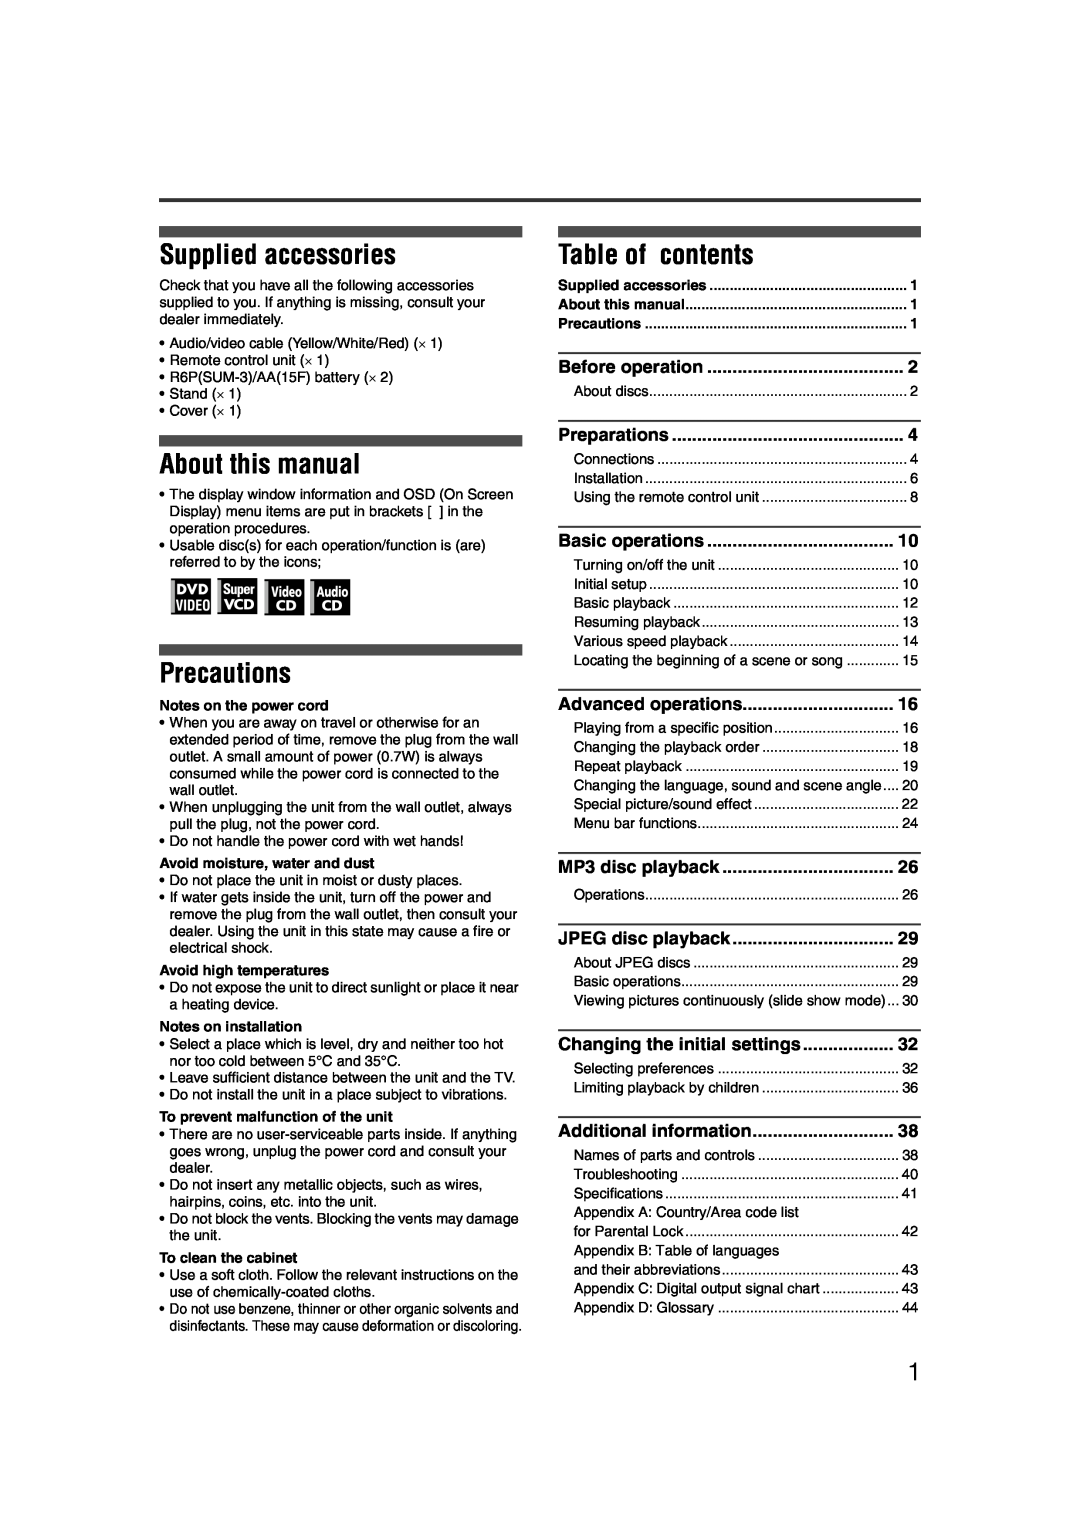 JVC LET0227-003A Supplied accessories, About this manual, Precautions, Table of contents, Before operation, Preparations 